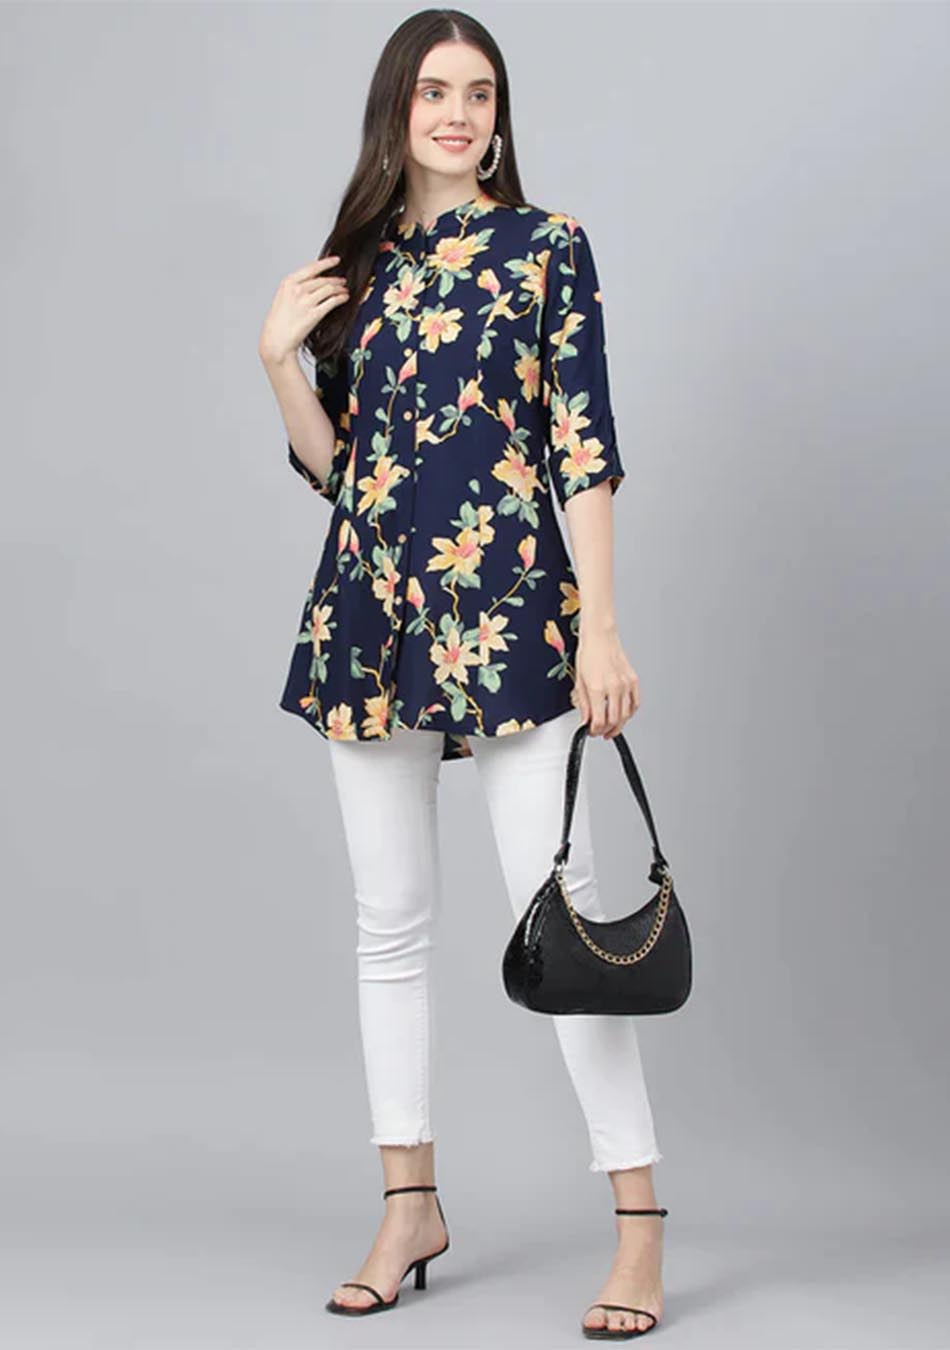 Navy Blue Floral printed Rayon A-line Shirts Style Top